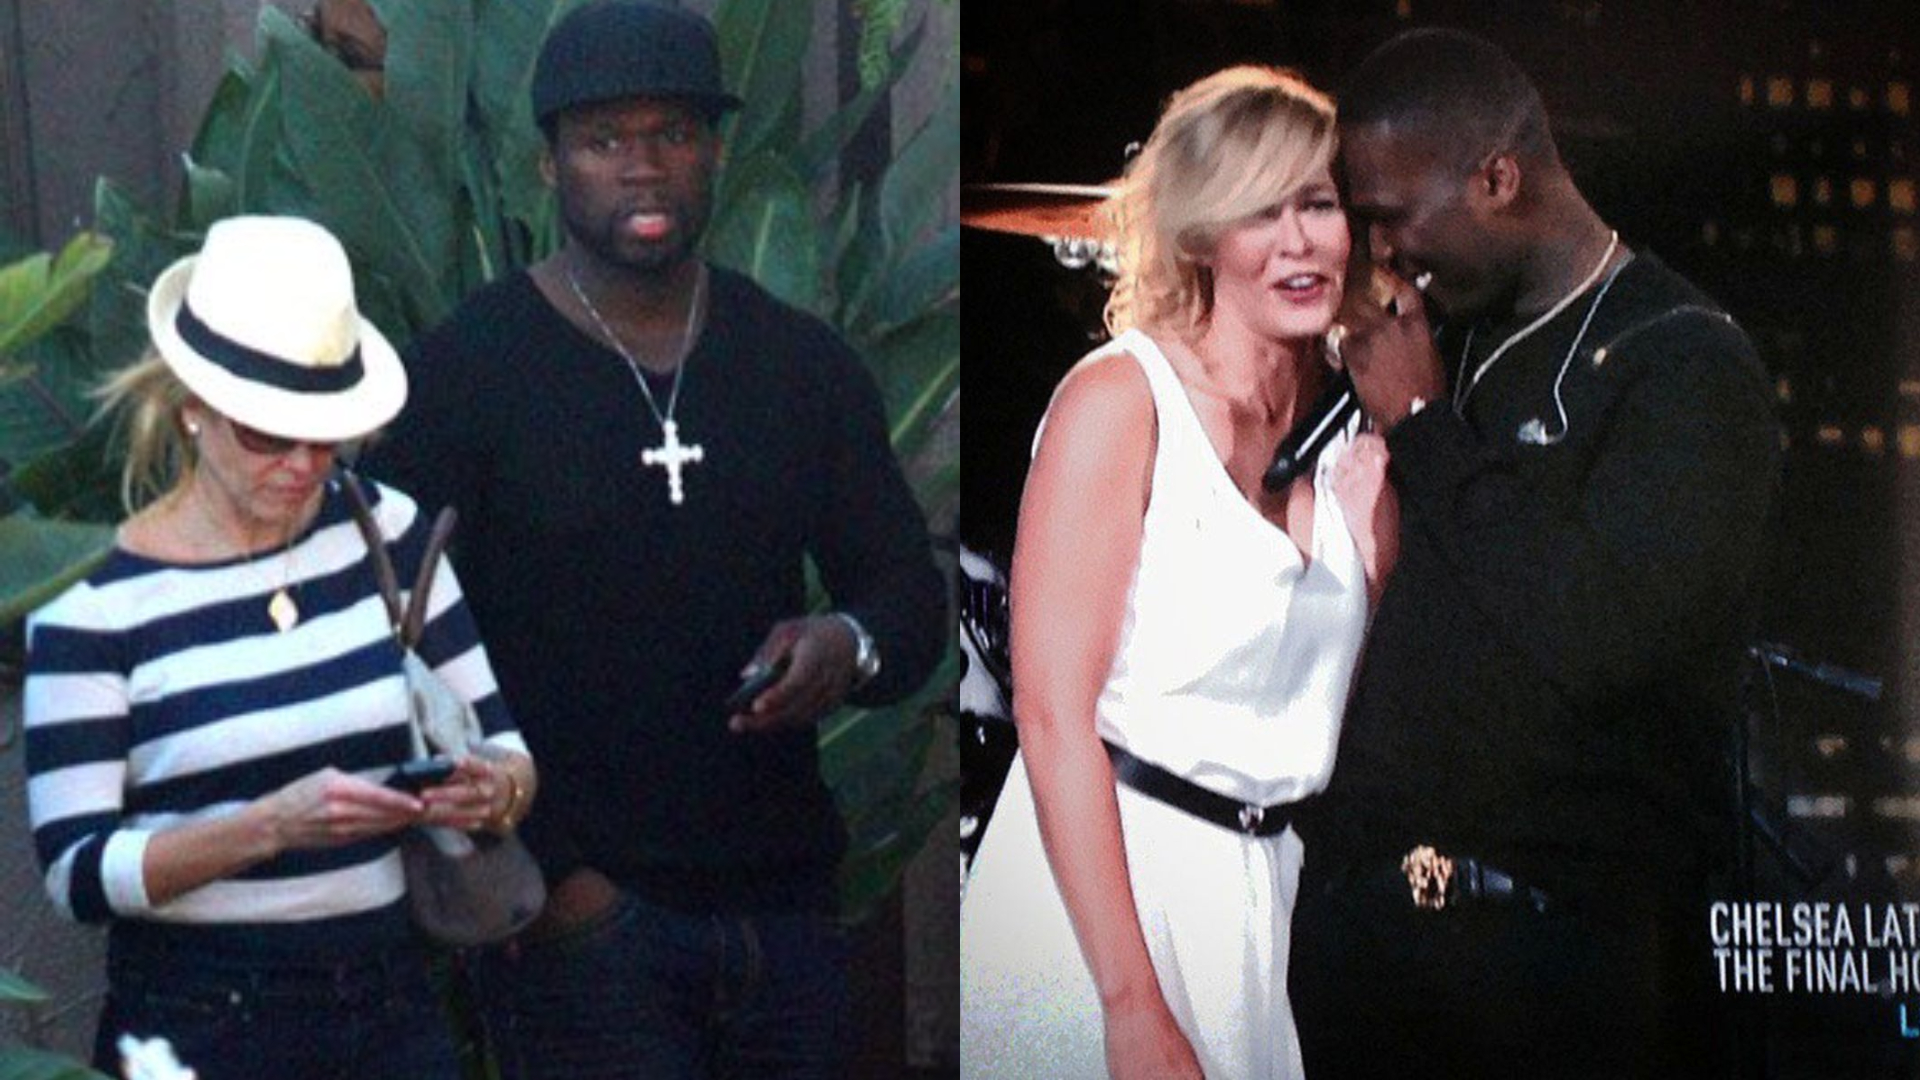 Chelsea handler 50 cent dating and Does Chelsea